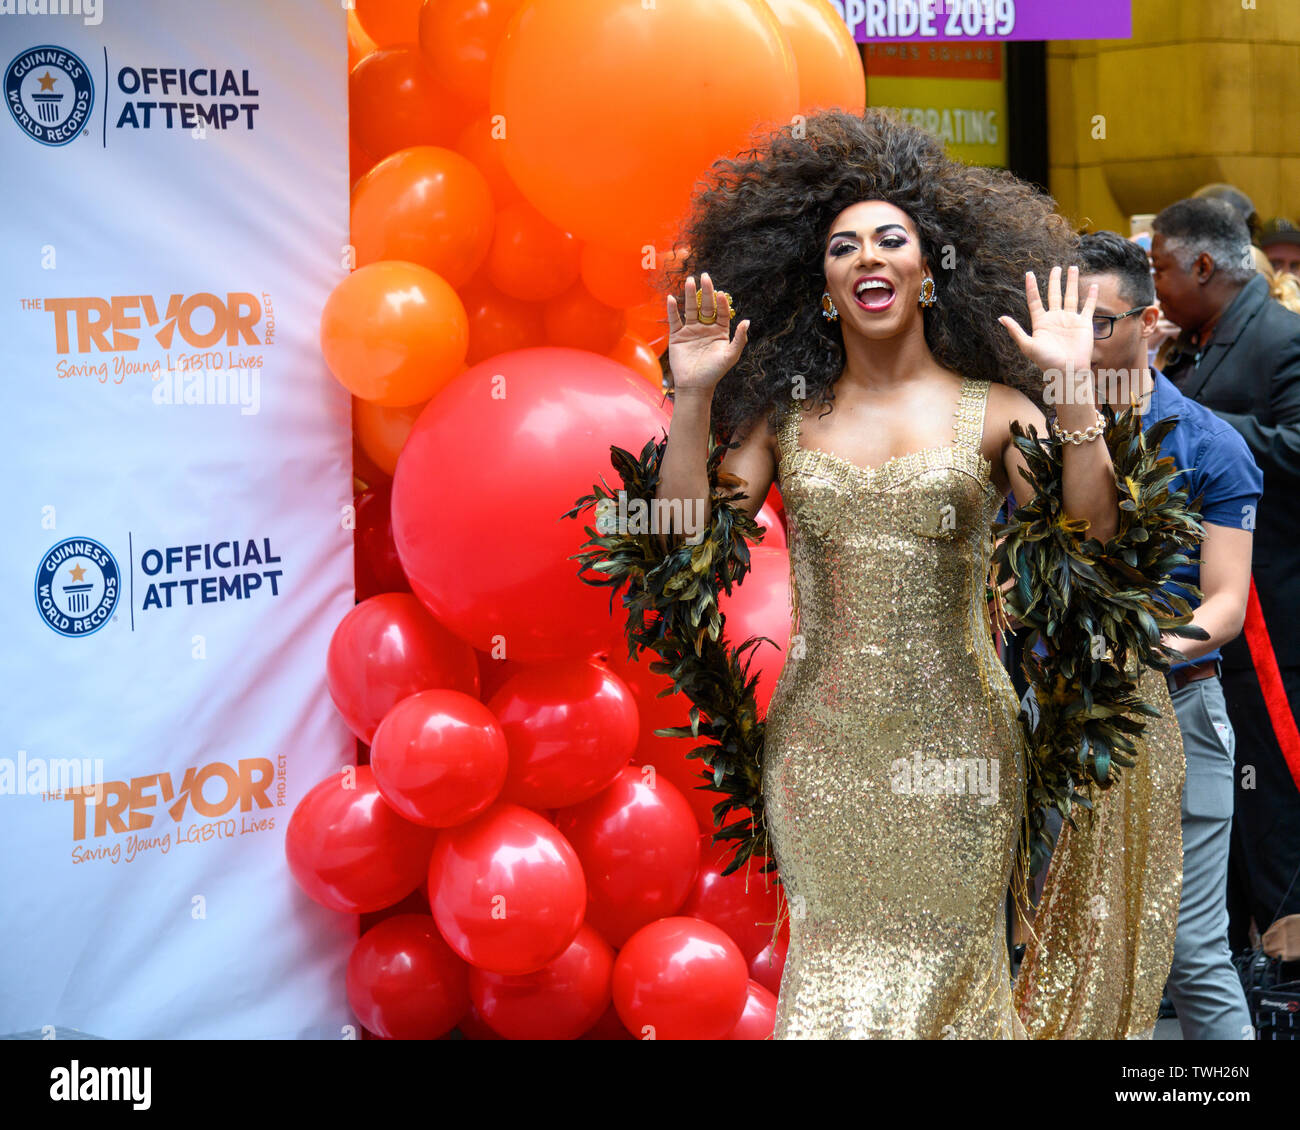 New York, USA,  20 June 2019. Drag Queen Shangela greets the public as she arrives to New York City's Times Square to attend an attempt to break the Guiness World Record title of the longest feather boa at 1.2 miles. The event was organized by Ripley's Believe or not! and Madame Tussauds in celebration of WorldPride and to commemorate the 50th anniversary of the Stonewall Uprising.  Credit: Enrique Shore/Alamy Live News Stock Photo